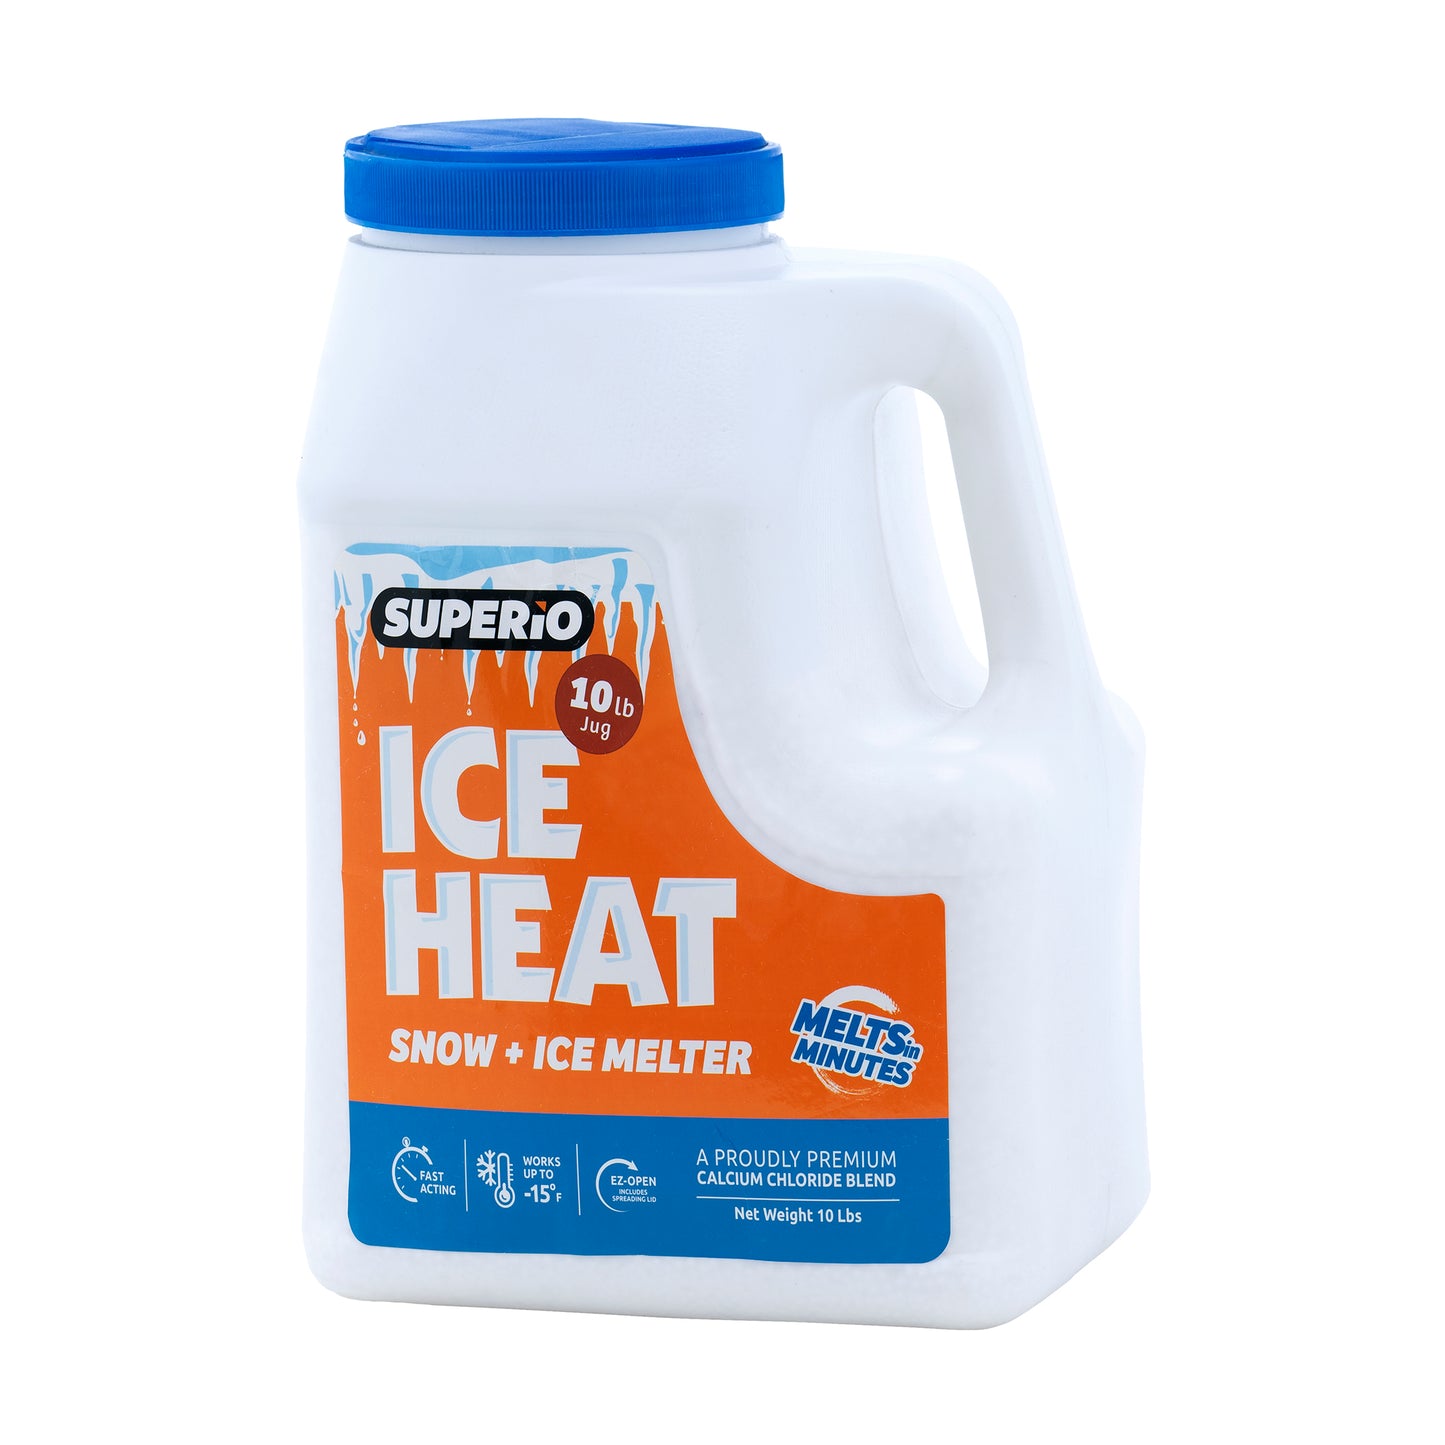 Snow and Ice Melter, Melts in Minutes (10 Lb bag)